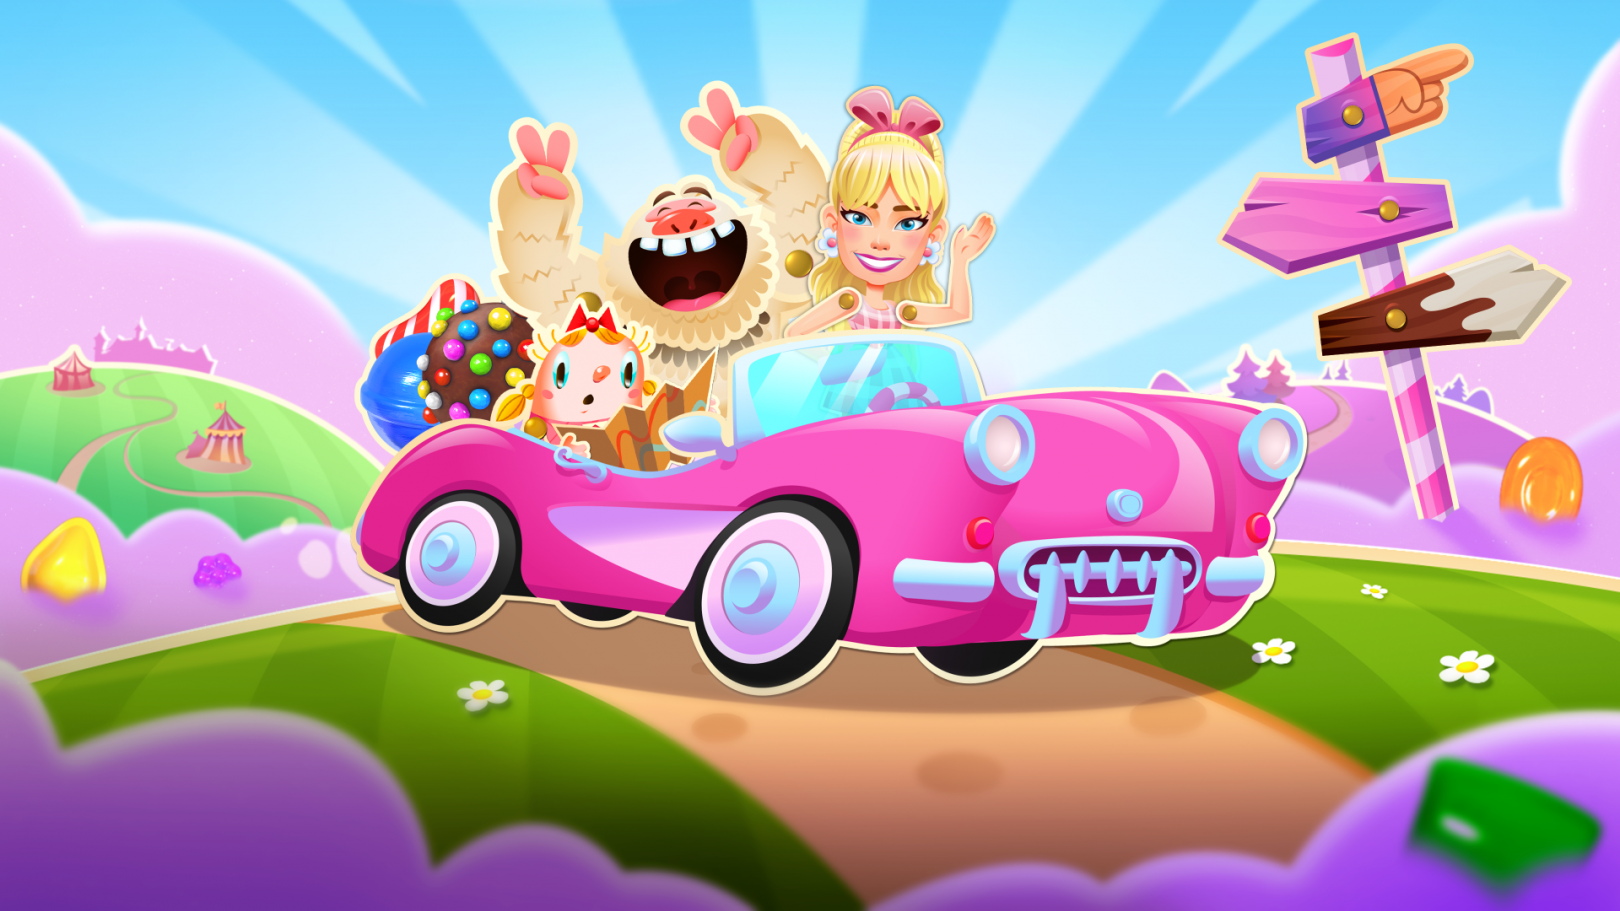 Has Anyone Noticed That World 6 of Candy Crush Saga Tooks The